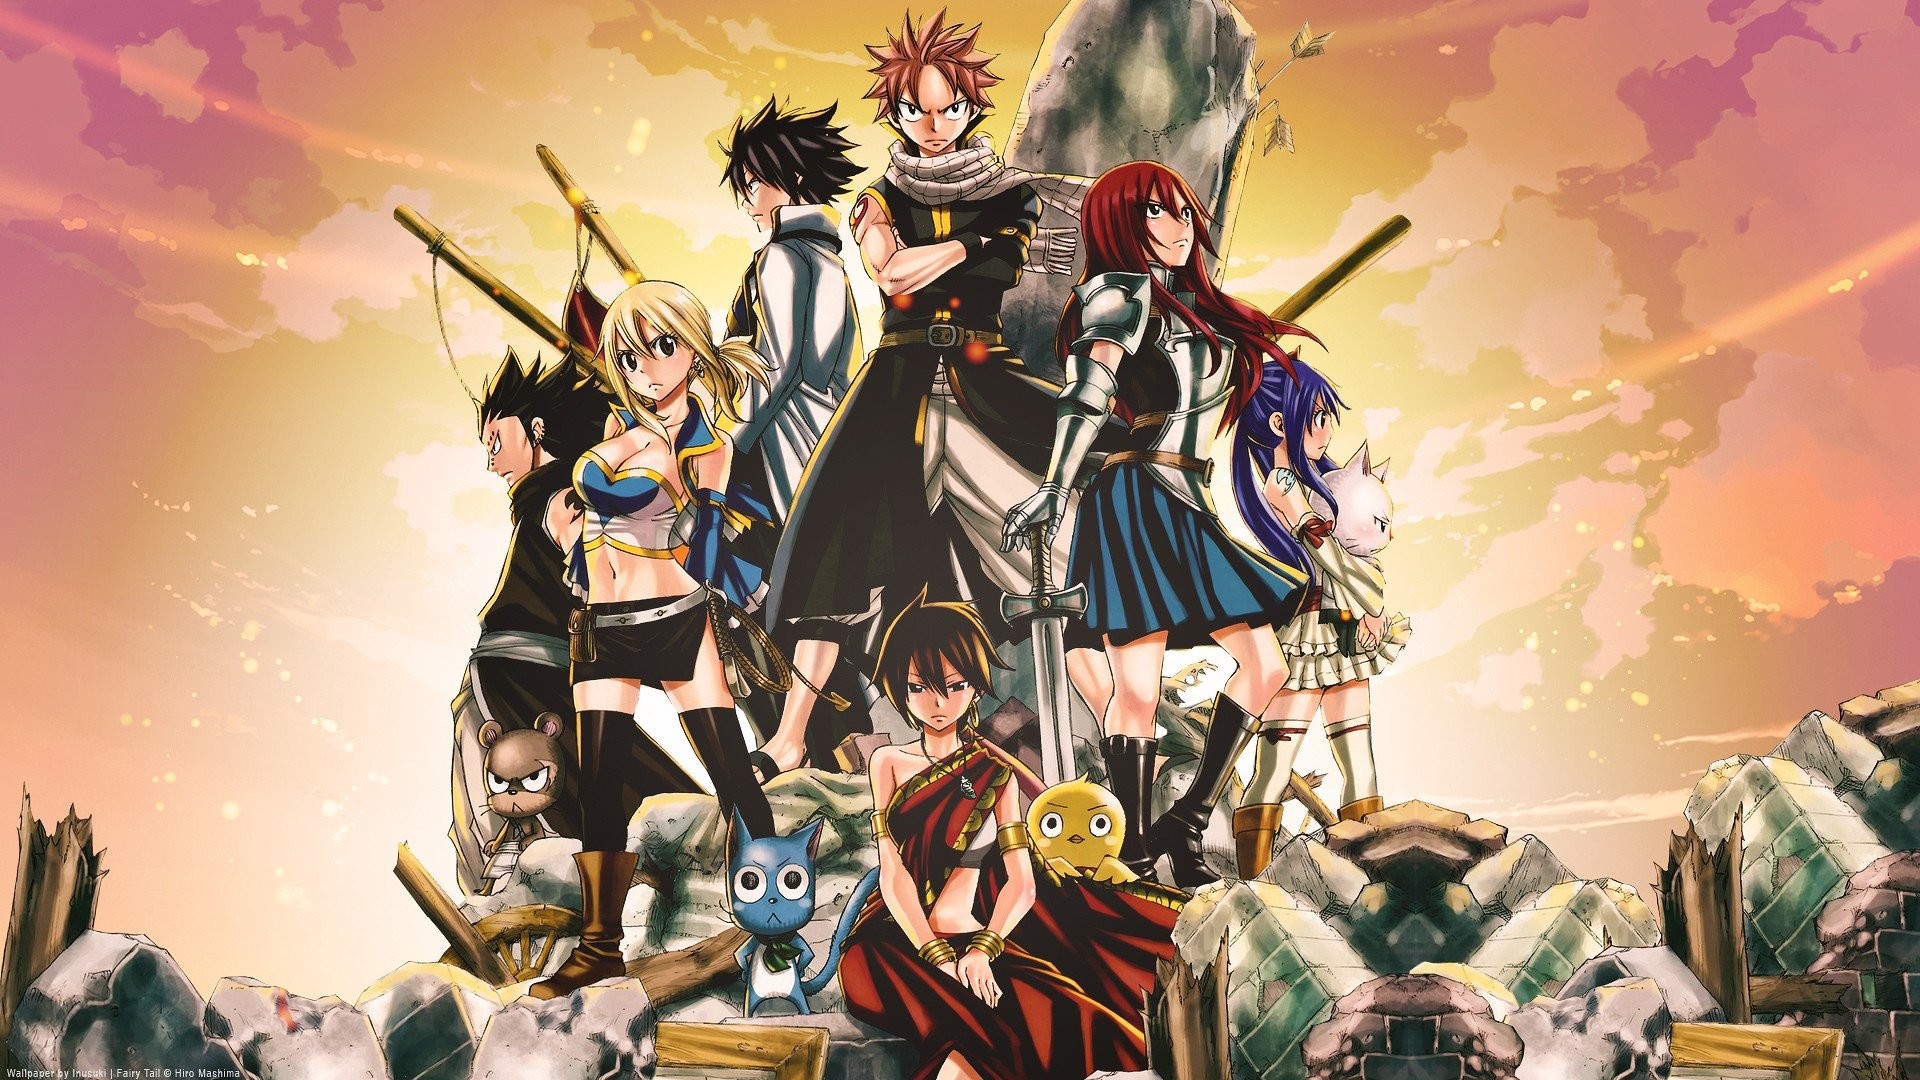 1920x1080 Anime Fairy Tail Dragneel Natsu Scarlet Erza Heartfilia Lucy Fullbuster  Gray Marvell Wendy Gajeel Redfox Clair